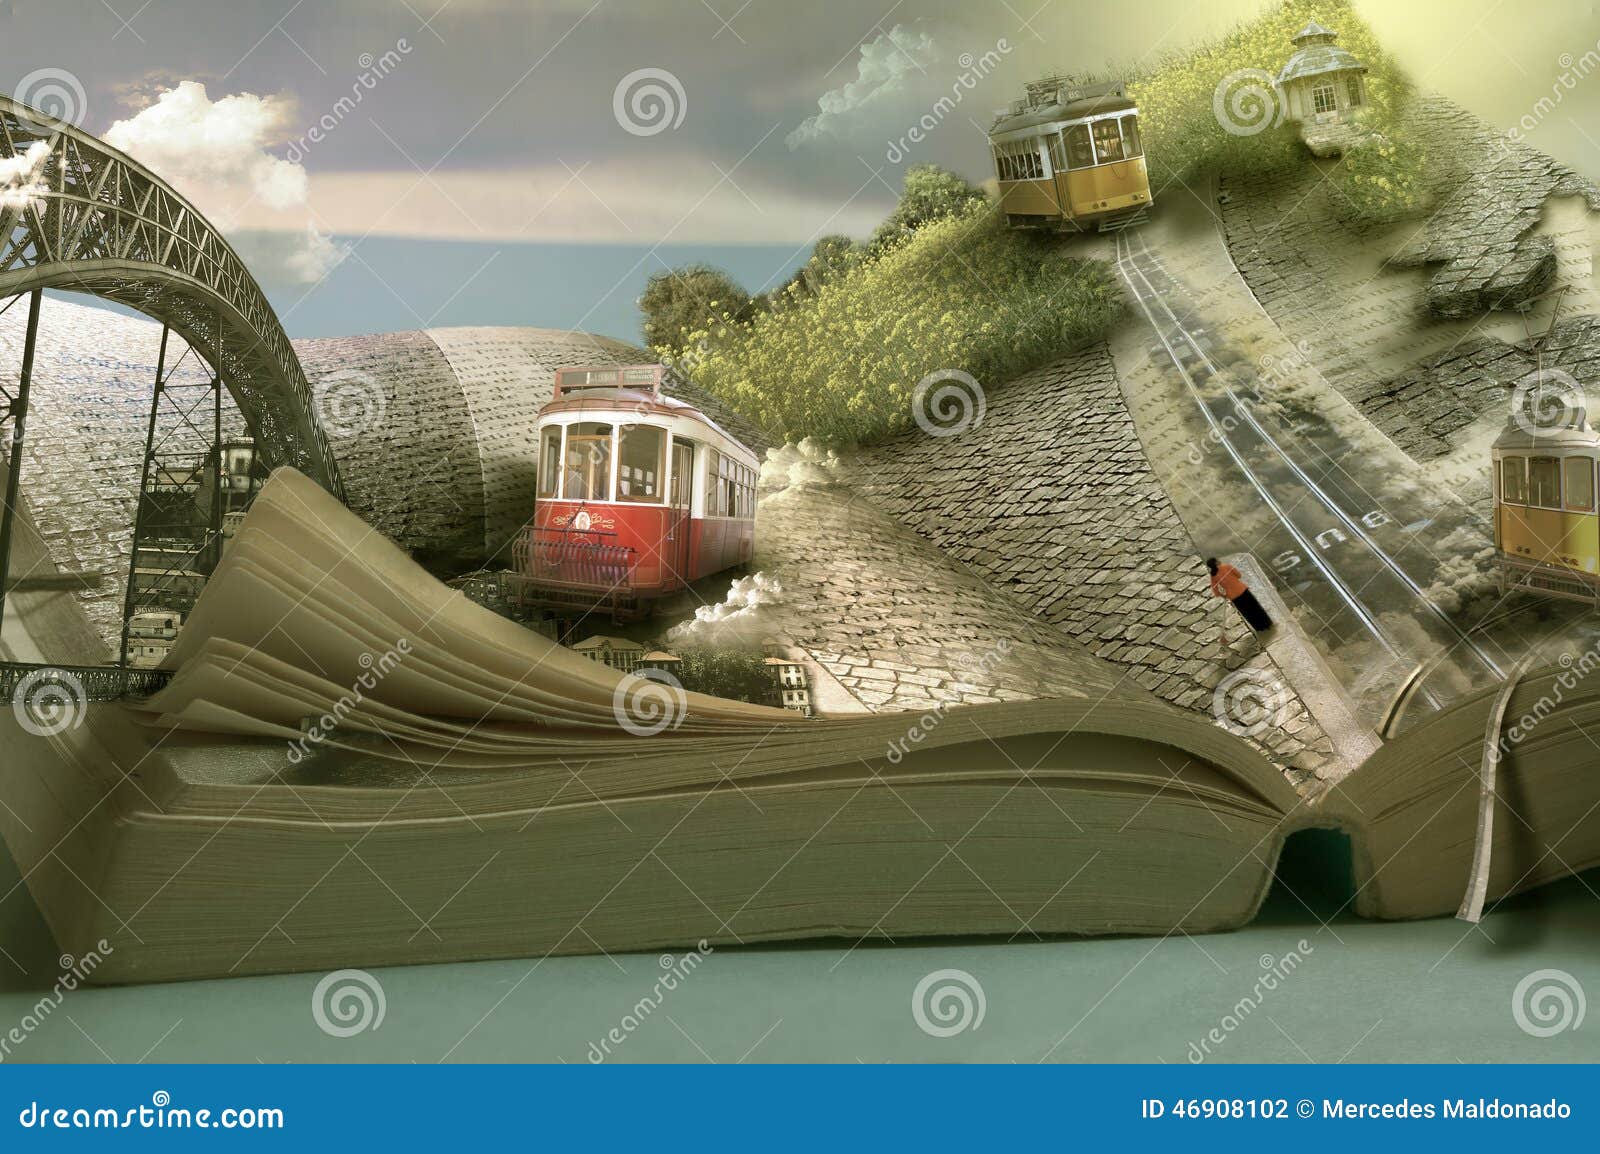 magical travel book, trams and towns. dimensional page open